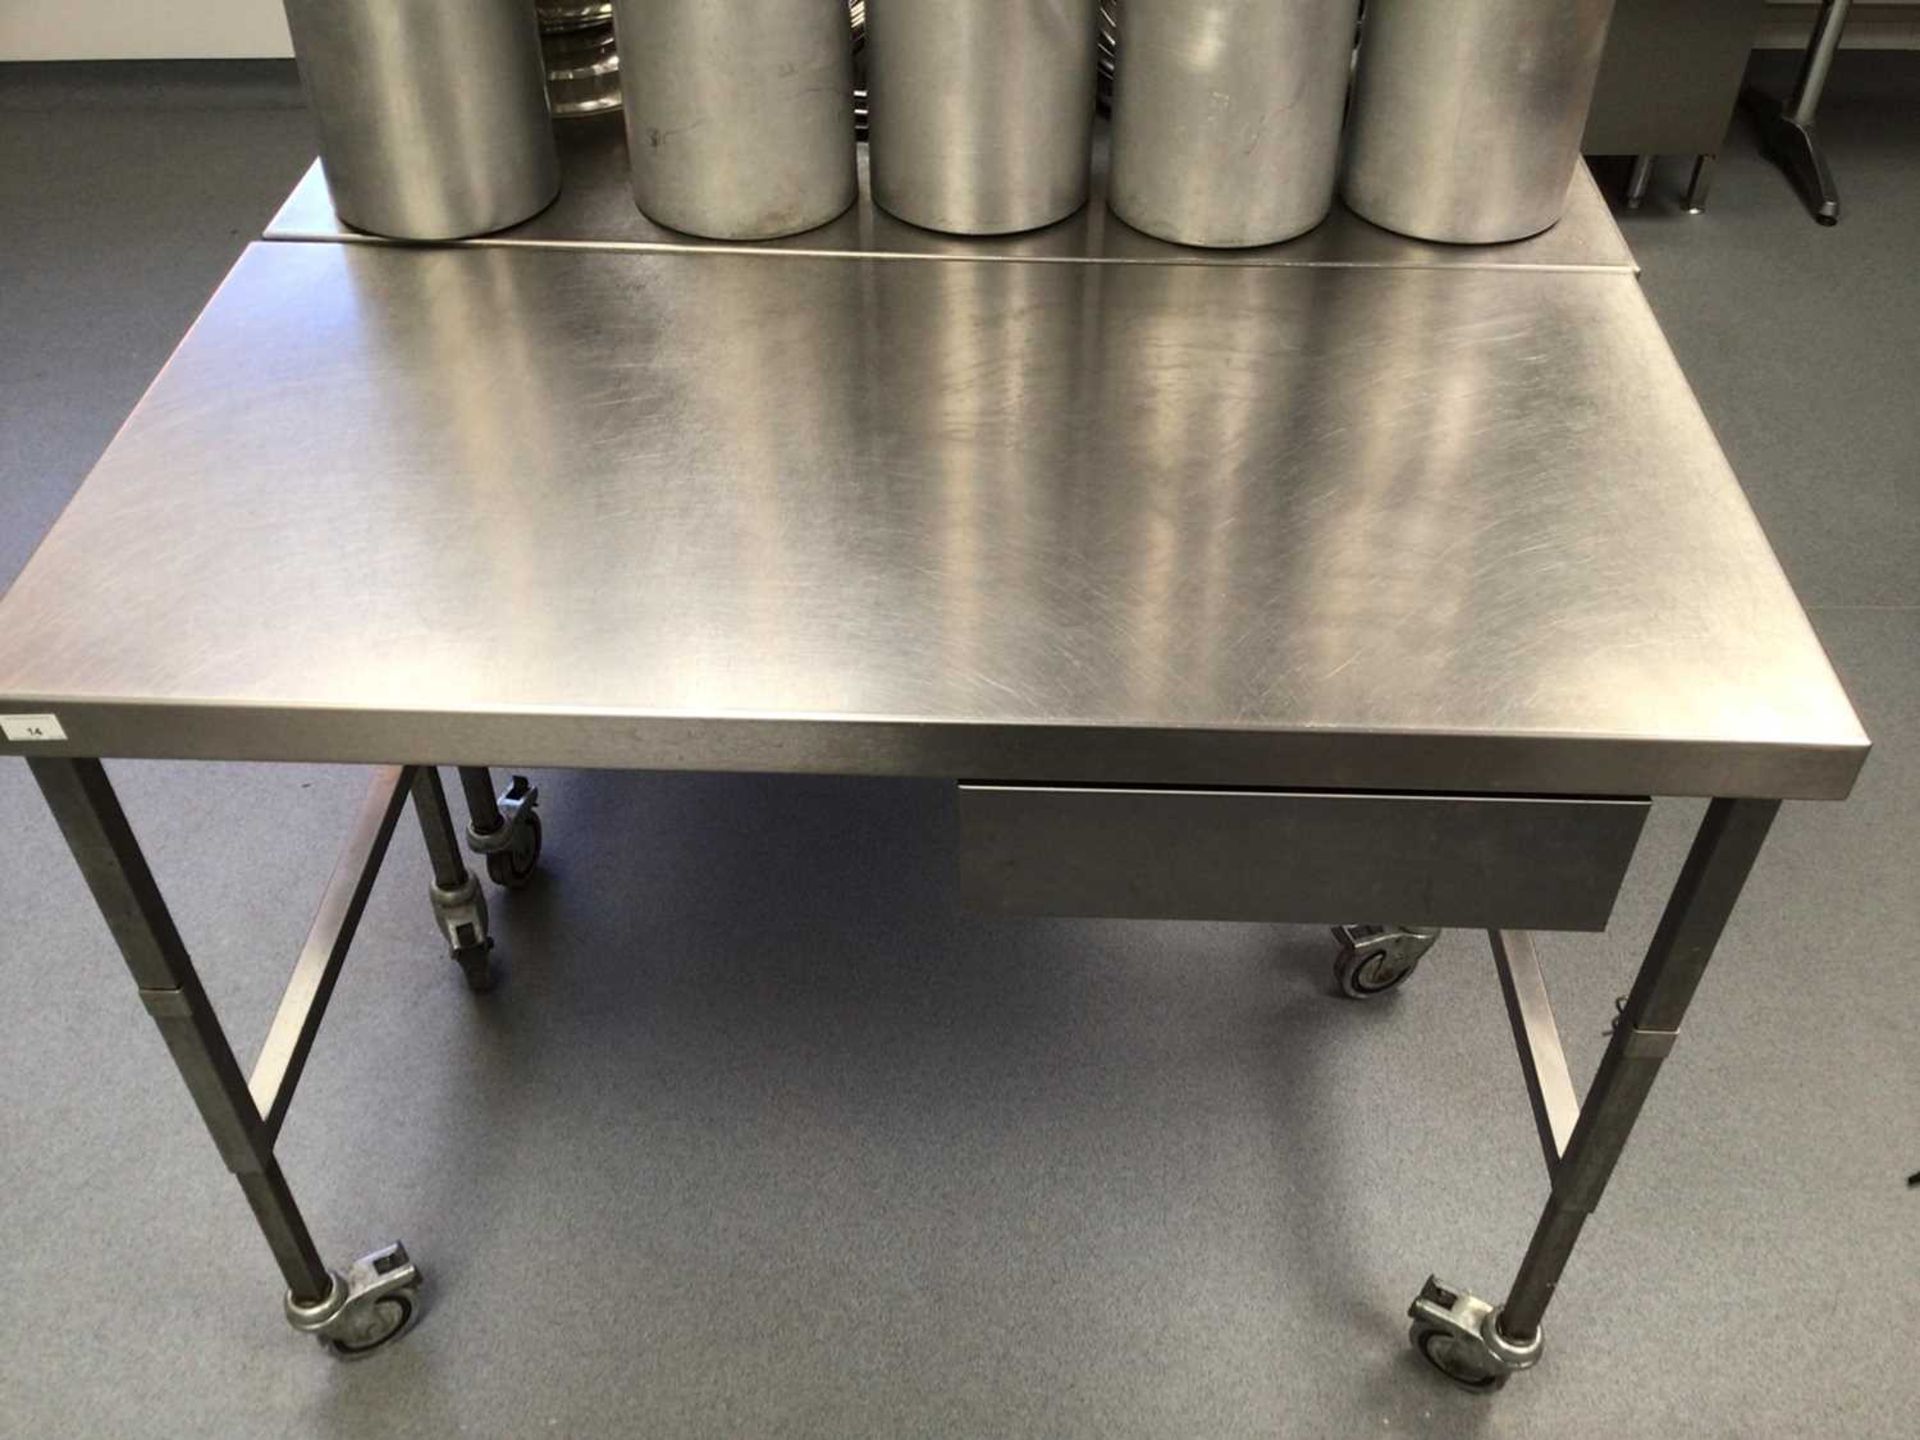 A stainless steel freestanding preparation bench, with drawer, on castors, 1200 mm - Bild 2 aus 2